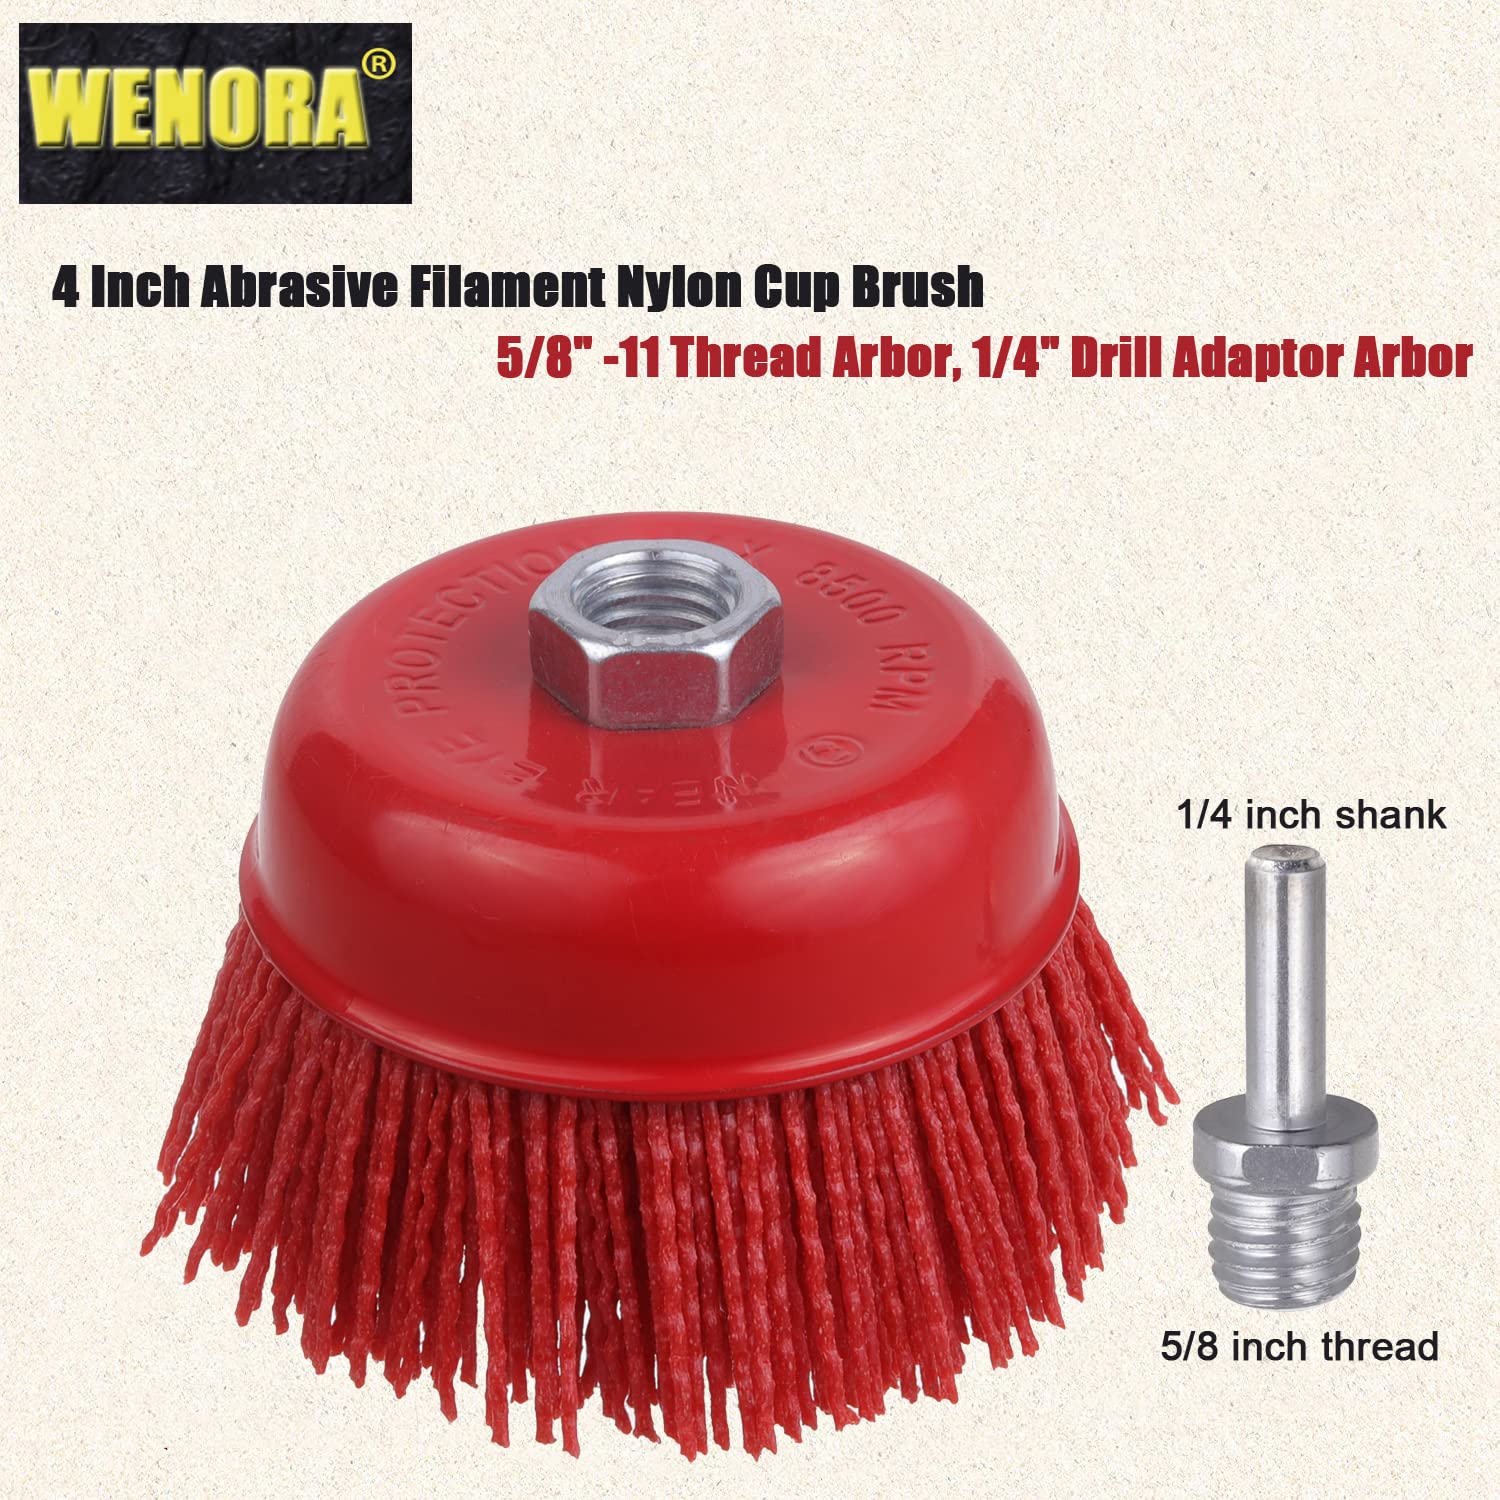 WENORA 4 Inch Nylon Cup Brush for Angle Grinder, Abrasive Filament Cup Brush, Nylon Wheel Brush for Grinder, 5/8" 11 Thread, 1/4" Drill Arbor